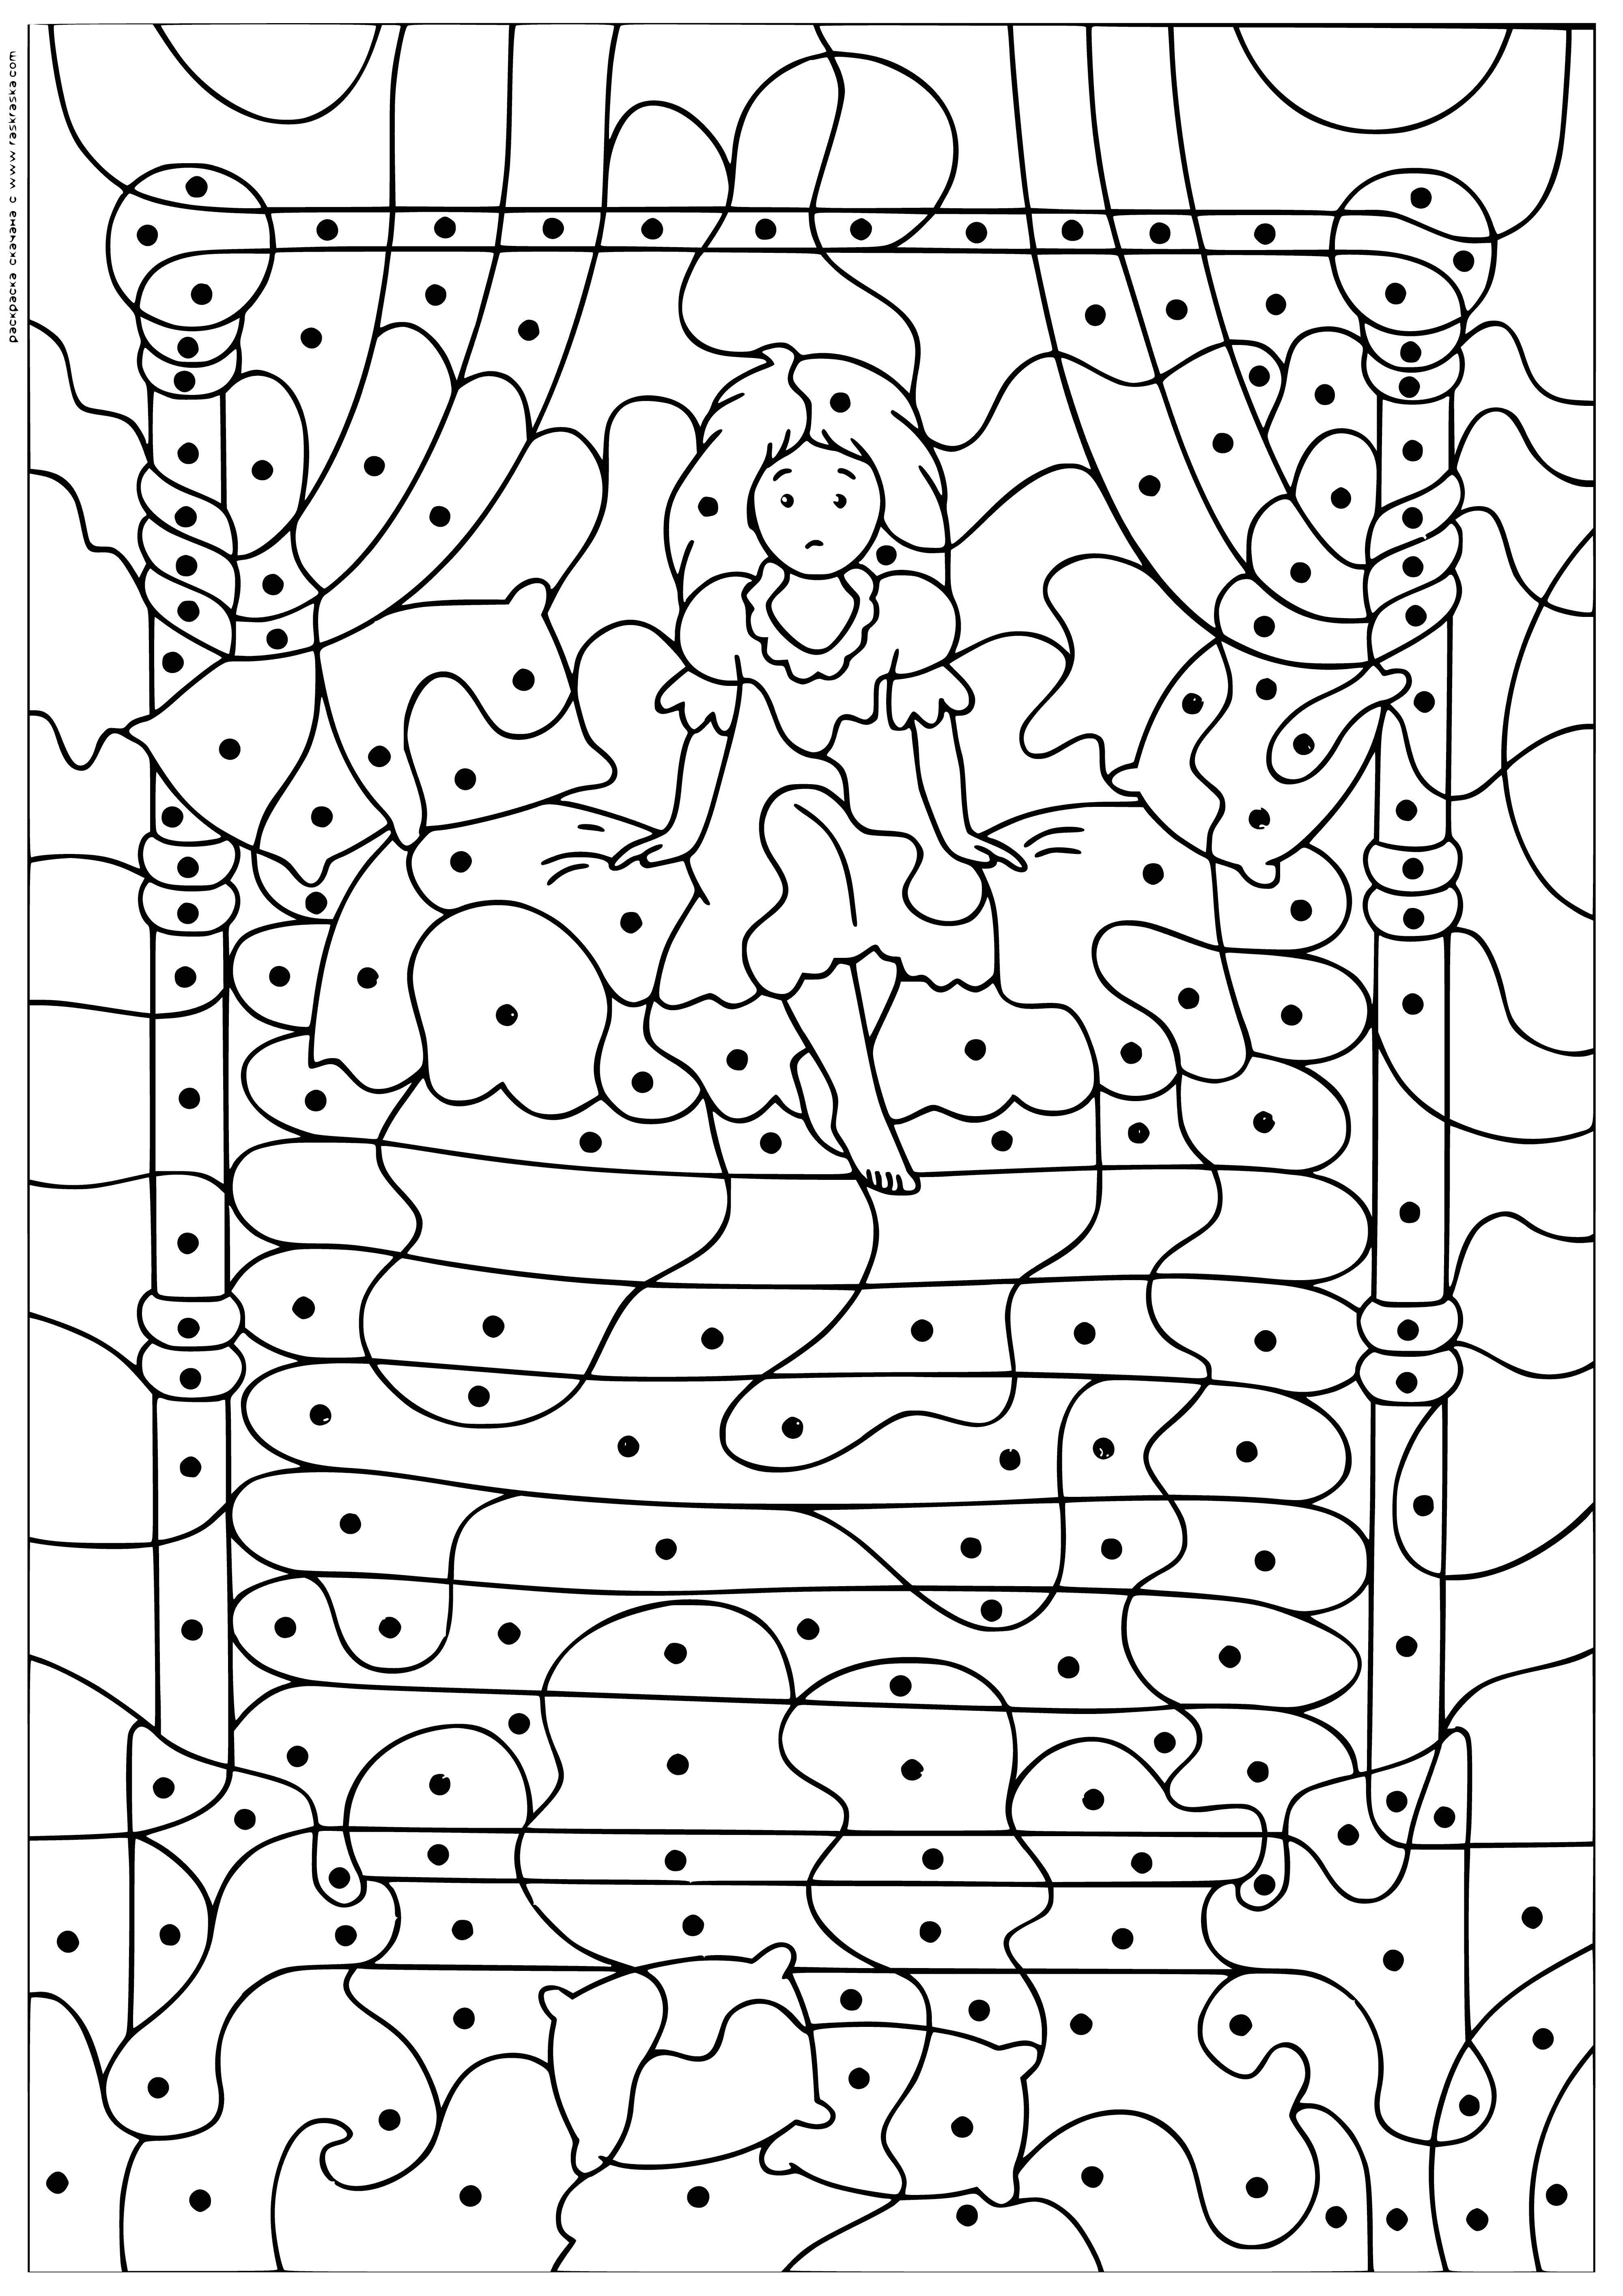 coloring page: Princess lies uncomfortably on bed of peas, in pain surrounded by them on the bed & floor.